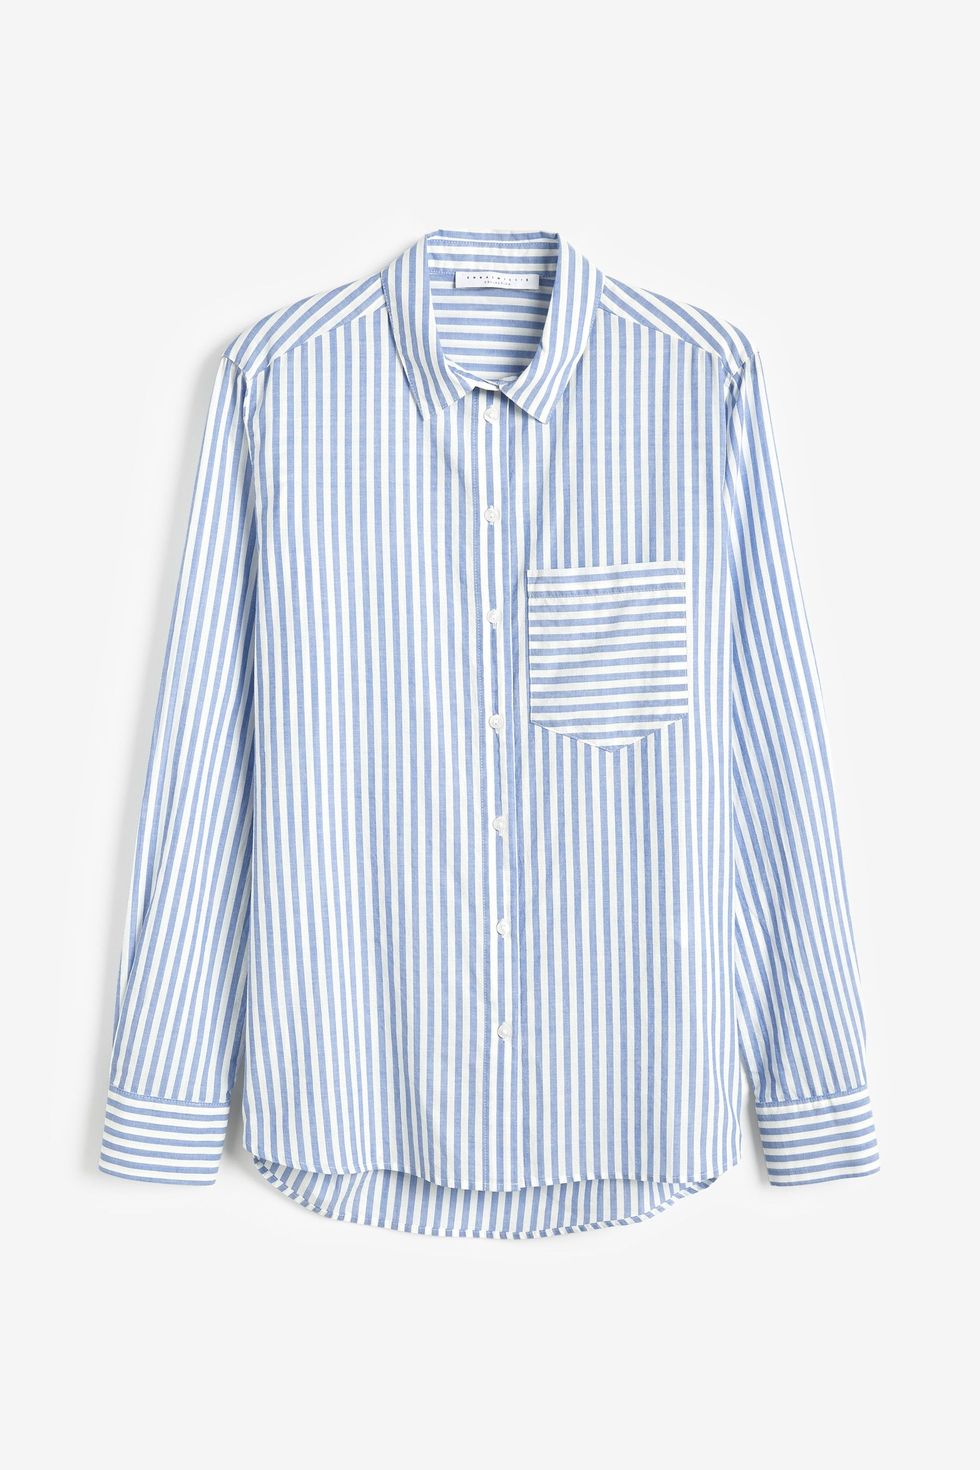 Duchess of Sussex's striped shirt - Where is Meghan Markle's blue shirt ...